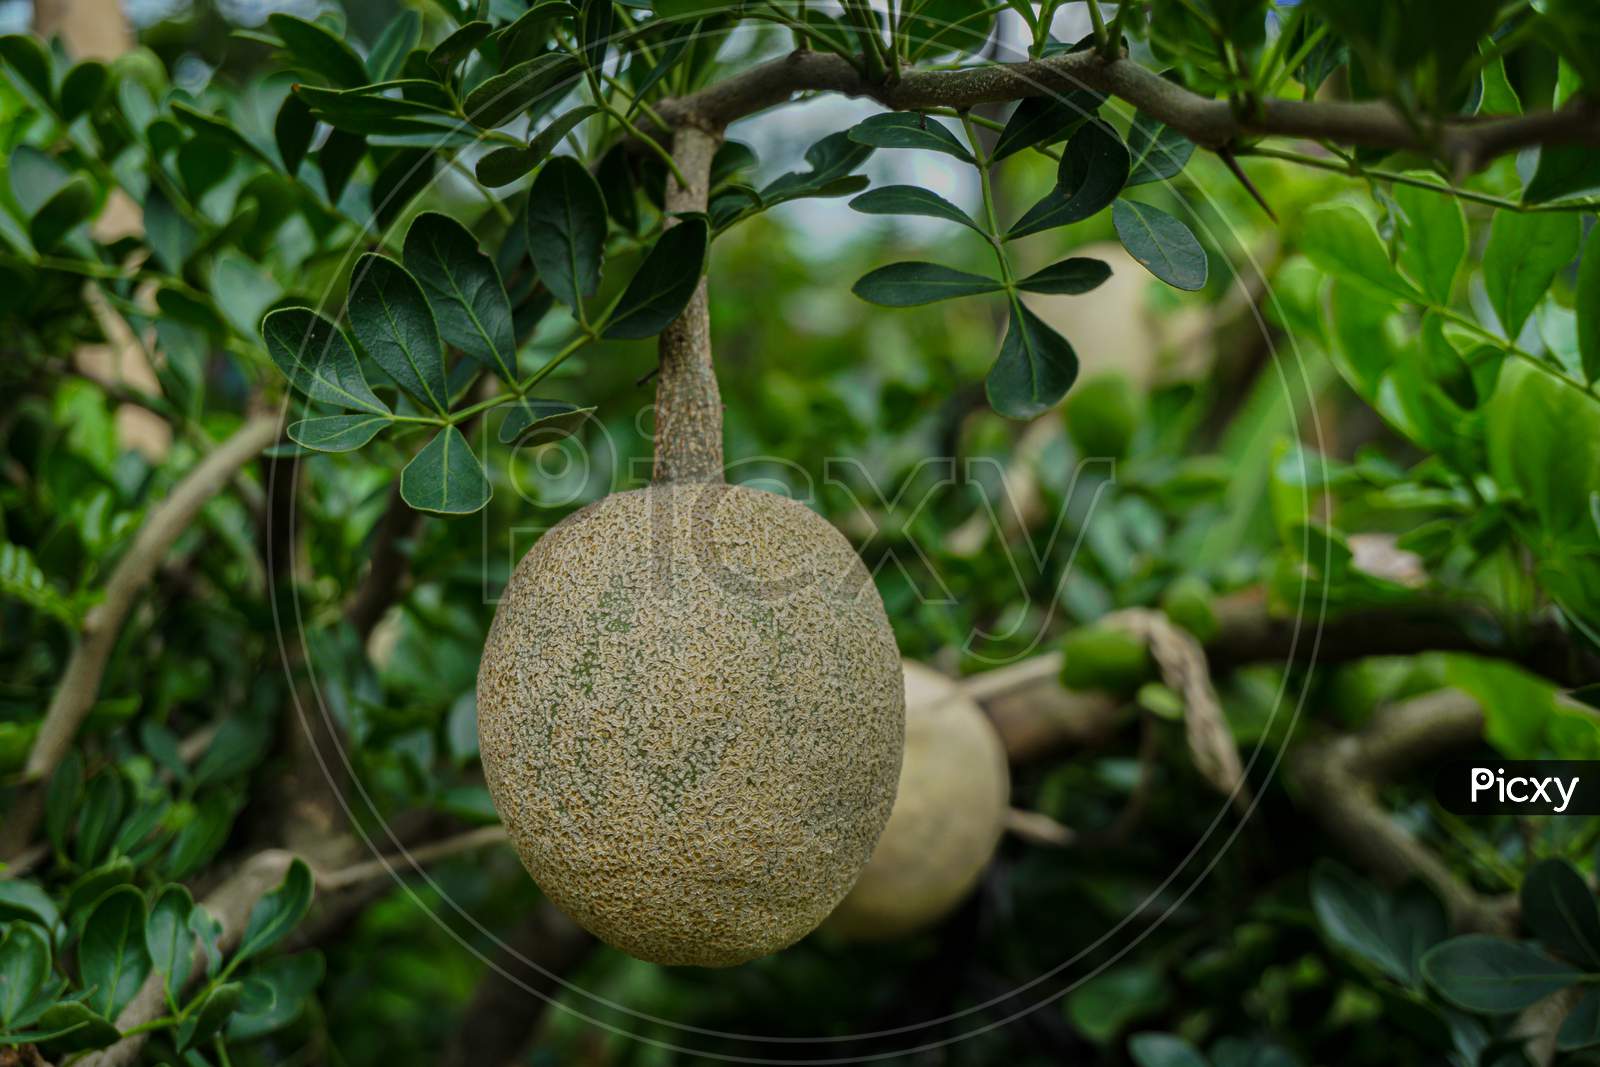 The Wood Apple (Limonia Acidissima) Is A Fruit, Which Has Other Names Like Elephant Apple.